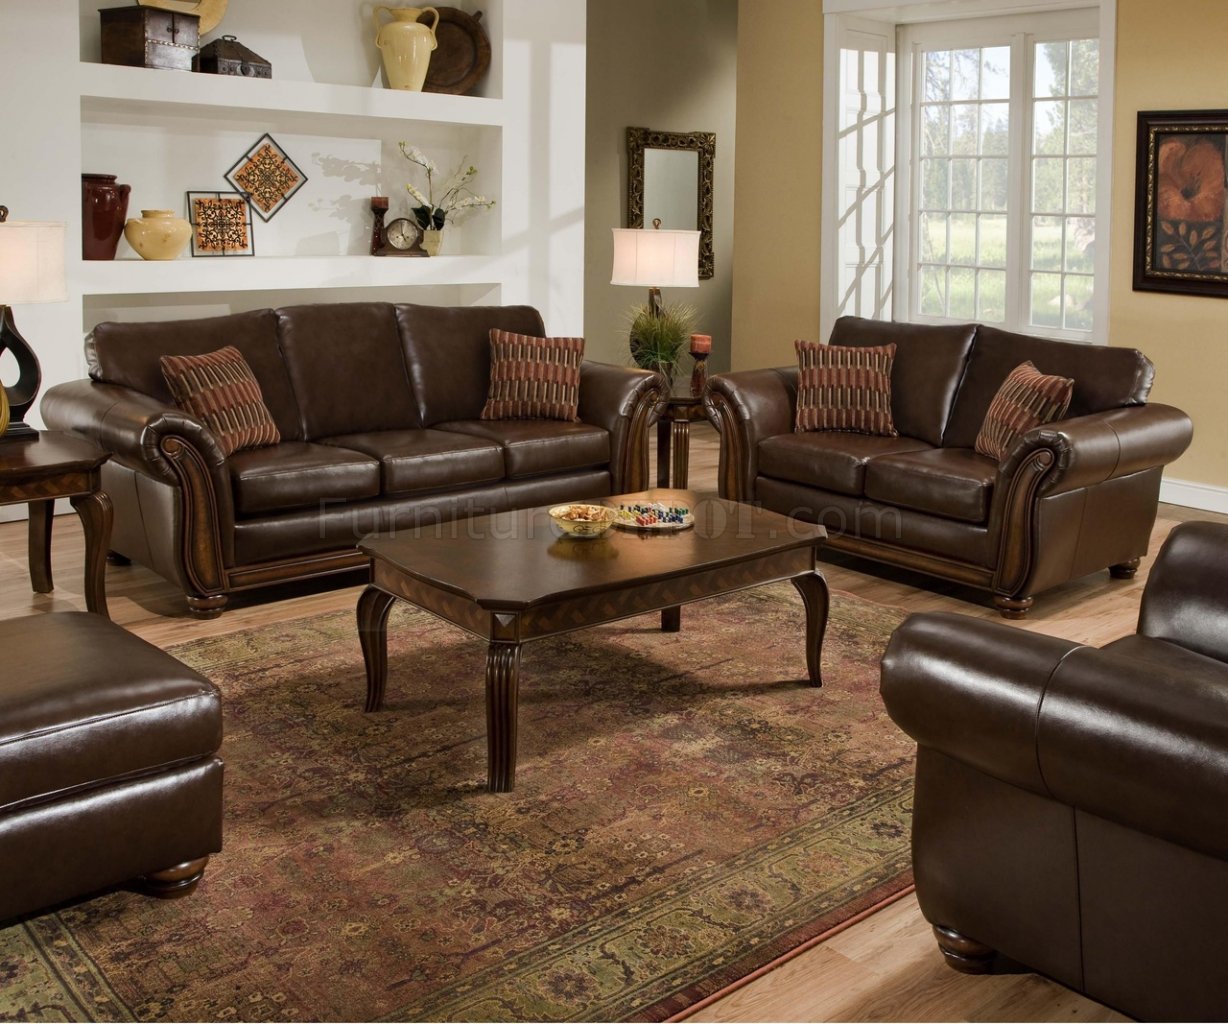 Vintage Soft Bonded Leather Sofa, Simmons Leather Sofa And Loveseat Set